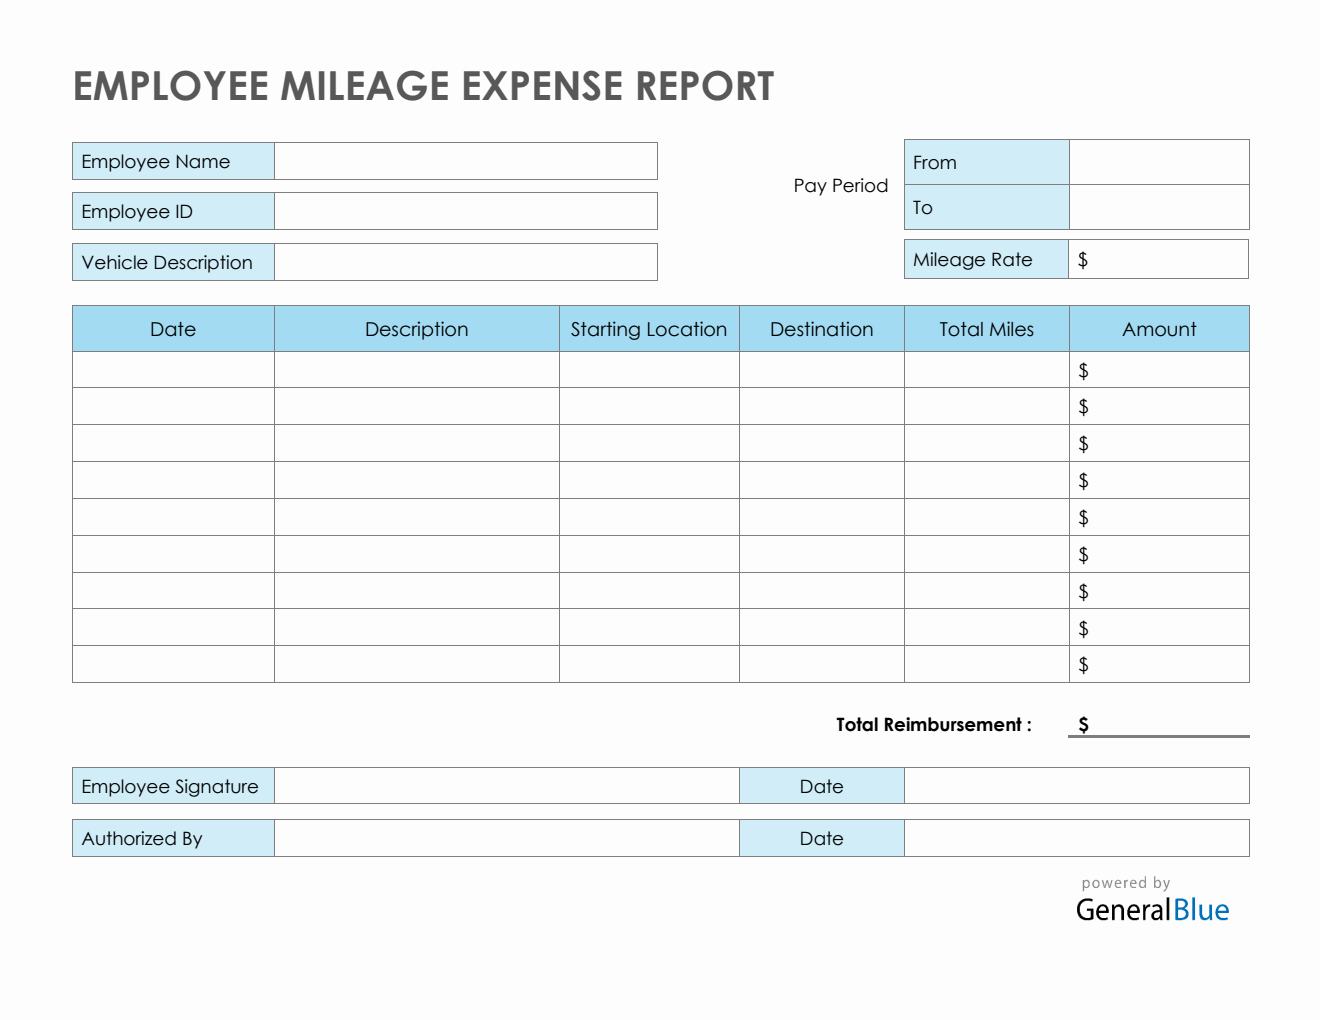  Employee Mileage Expense Report Template in PDF